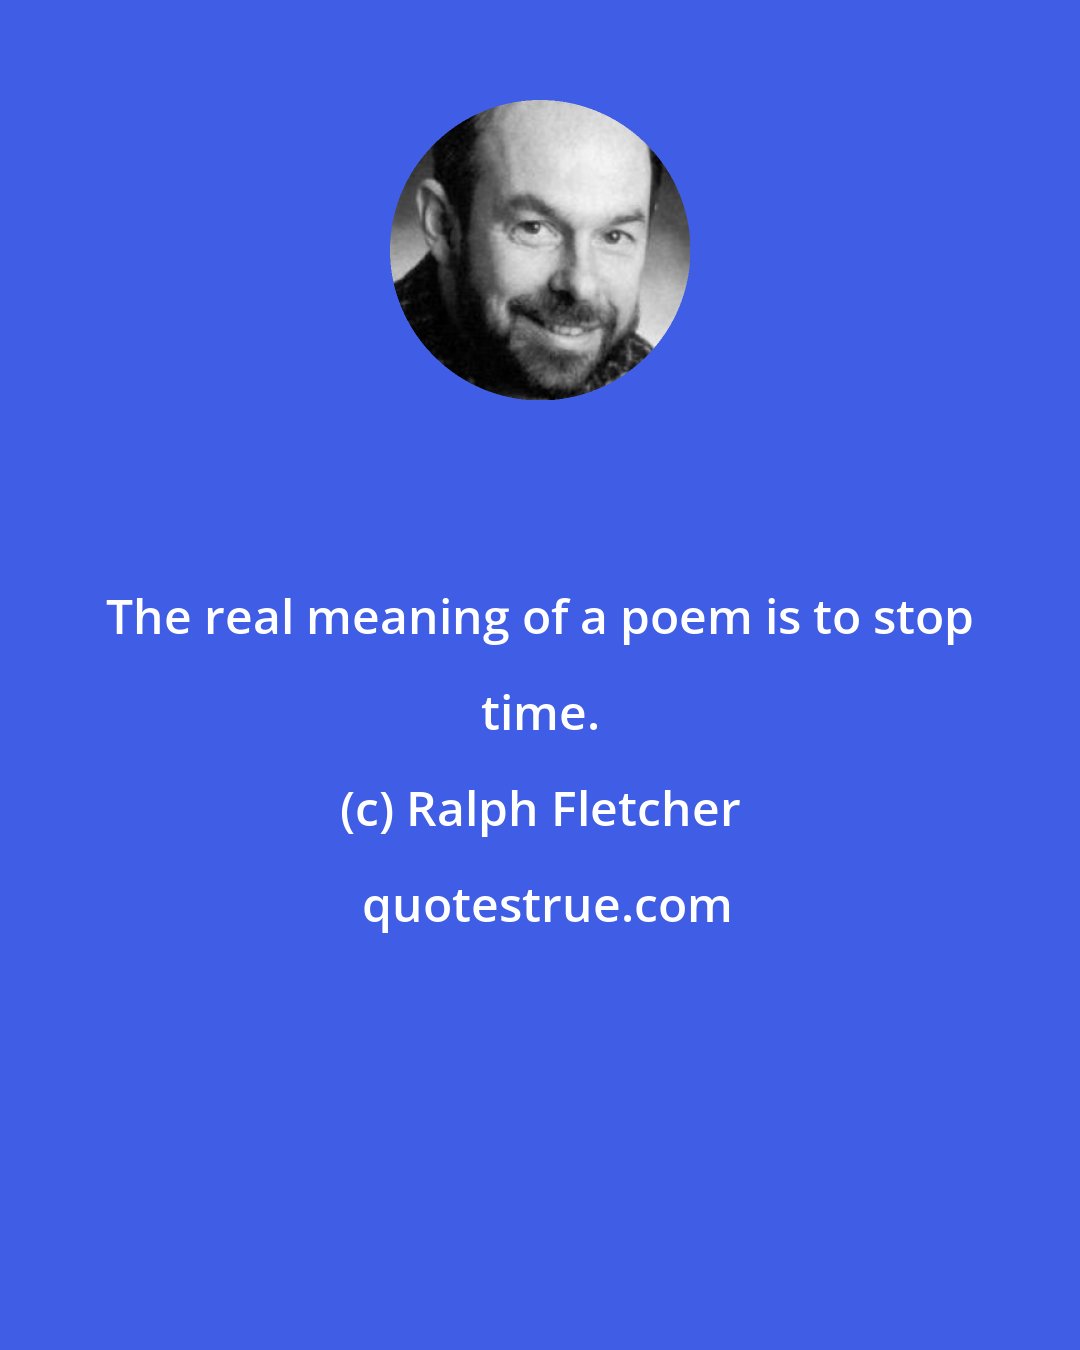 Ralph Fletcher: The real meaning of a poem is to stop time.